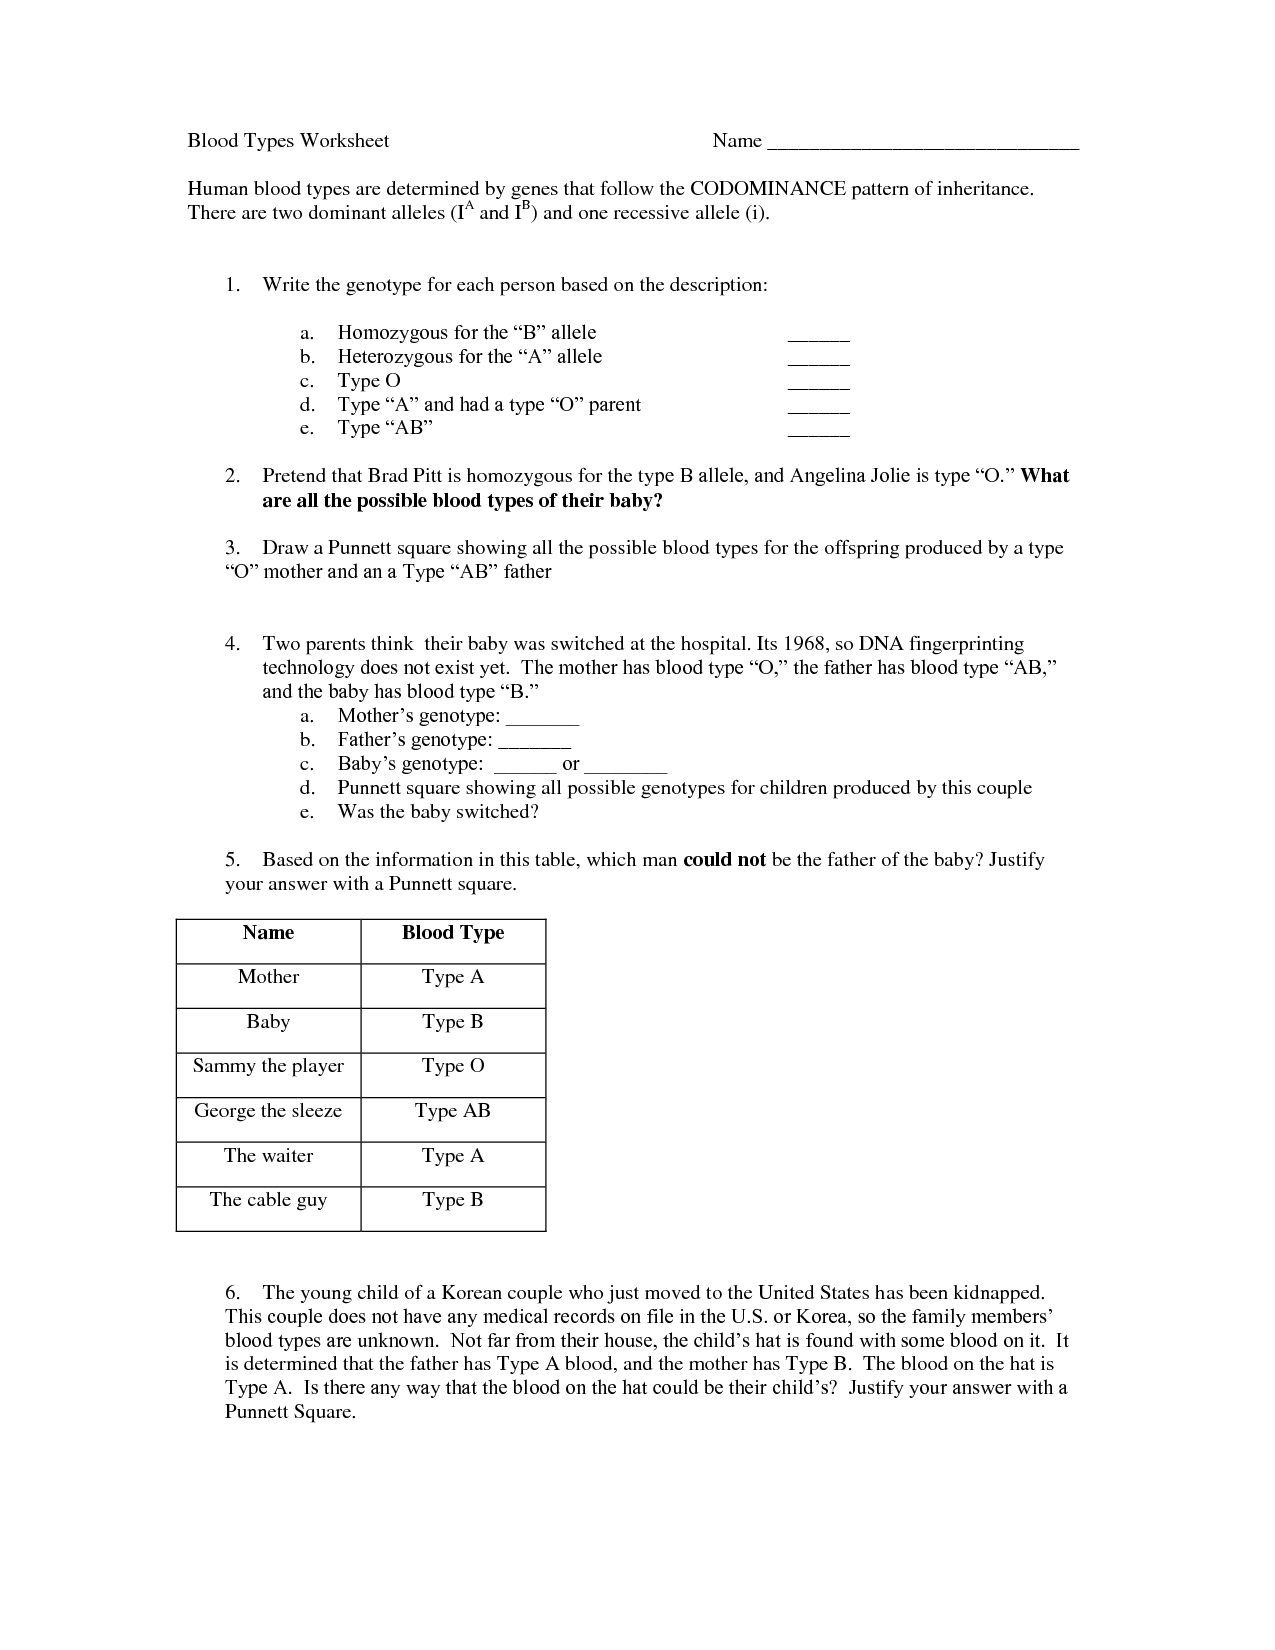 abo-rh-simulated-blood-typing-worksheet-answers-db-excel